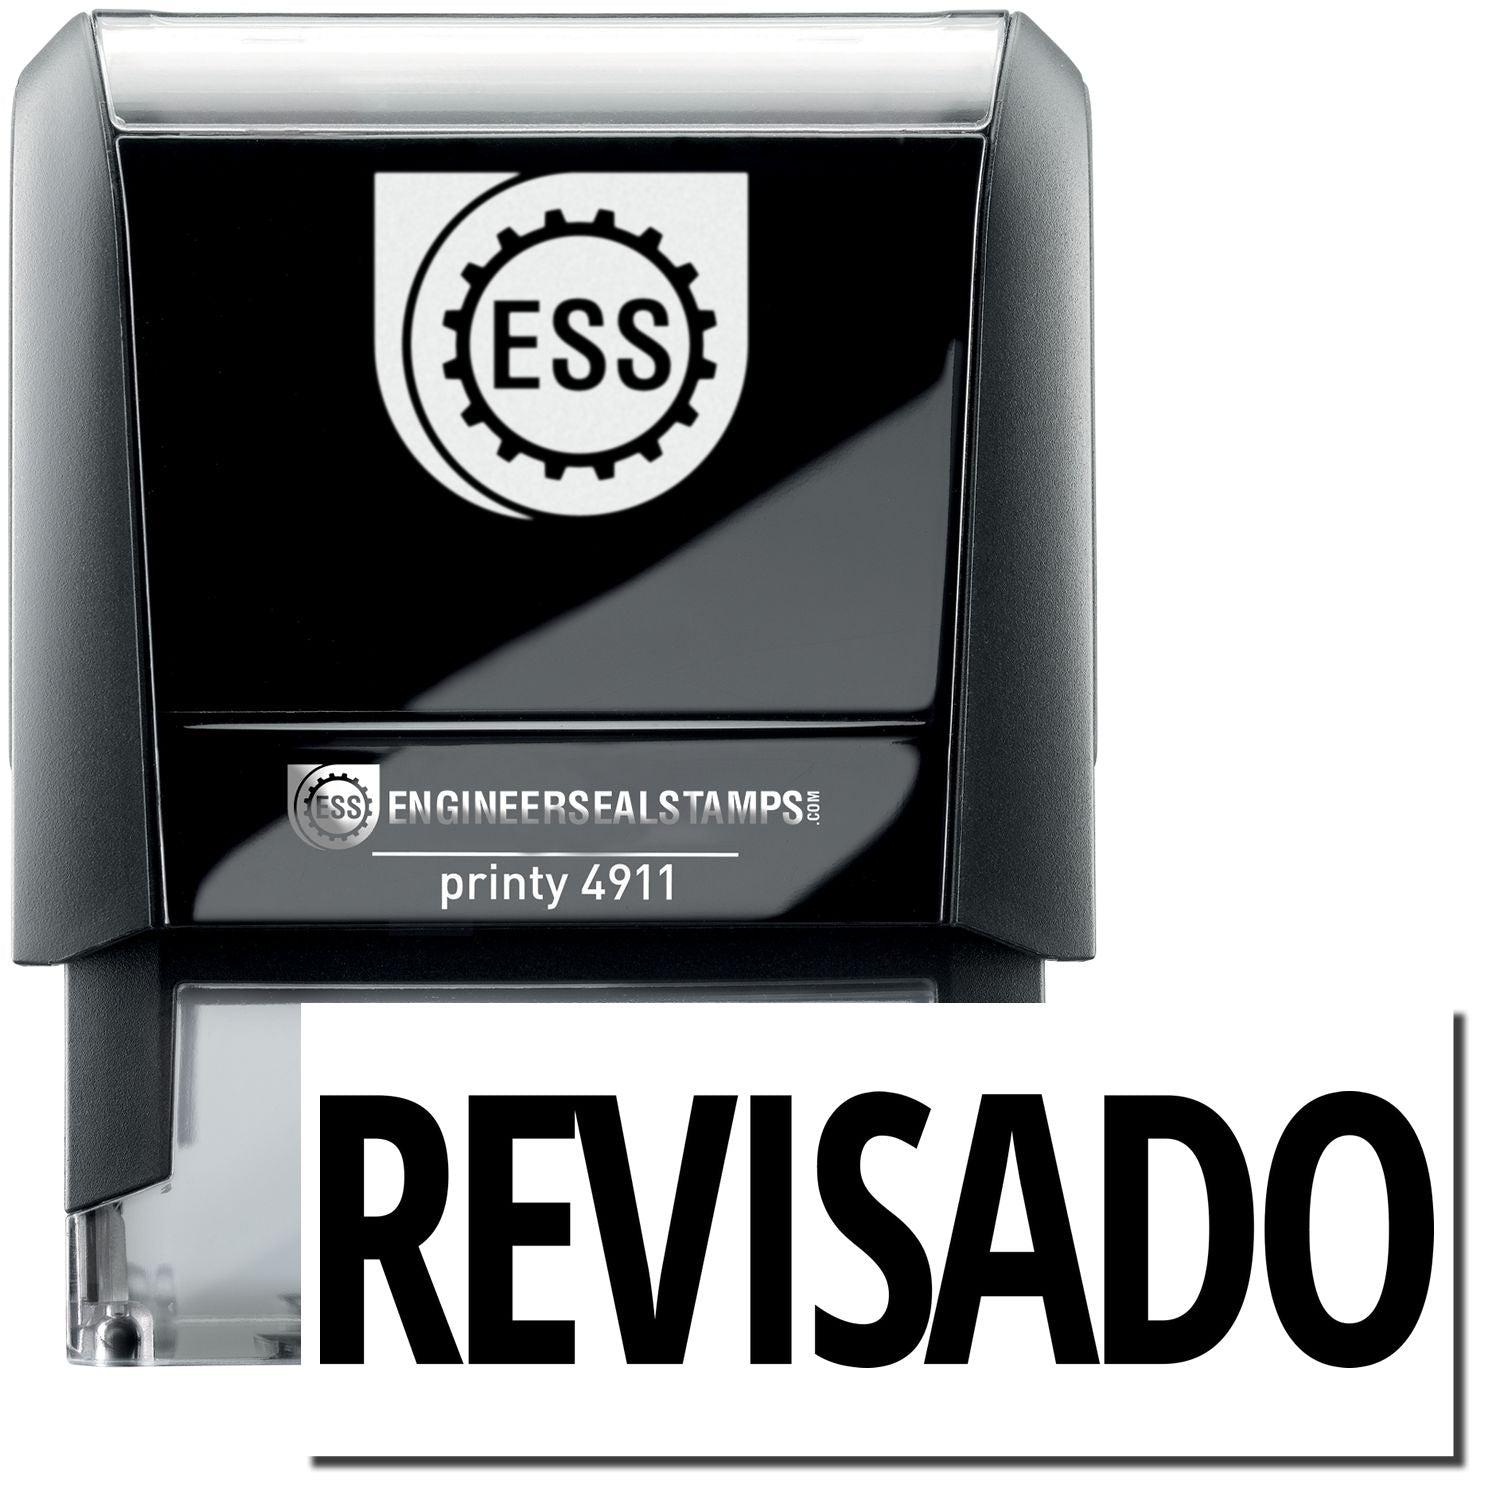 A self-inking stamp with a stamped image showing how the text "REVISADO" is displayed after stamping.